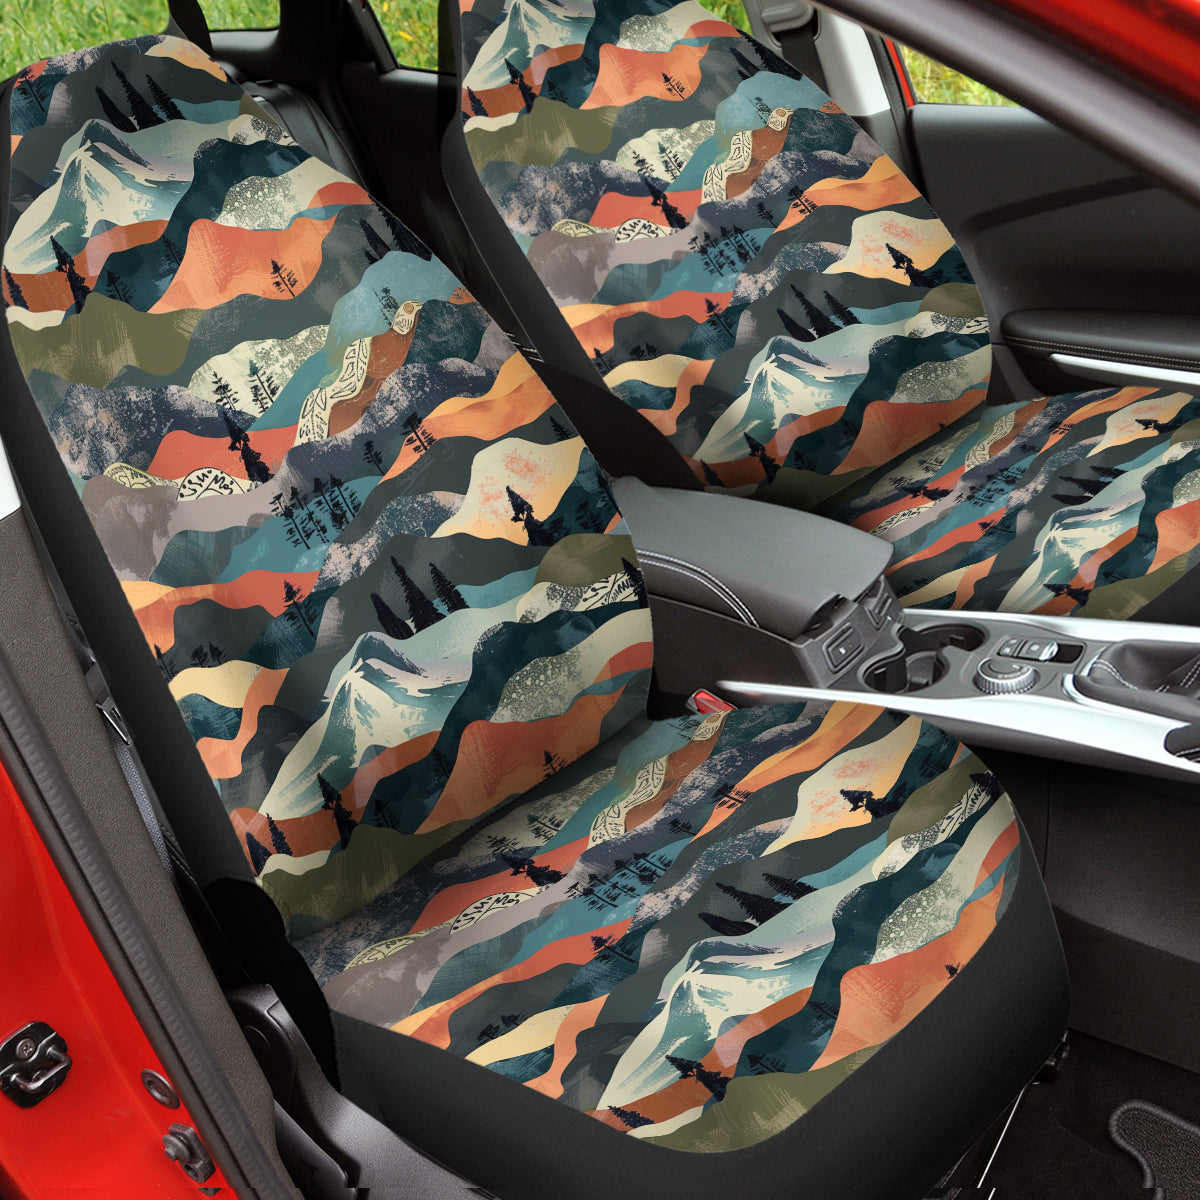 Boho Mountain Car Seat Covers Car Seat Accessory Retro Mod Car Decor Vehicle Hippie Van Seat Cover Car Gift Hippy Seat Cover, Pattern 03